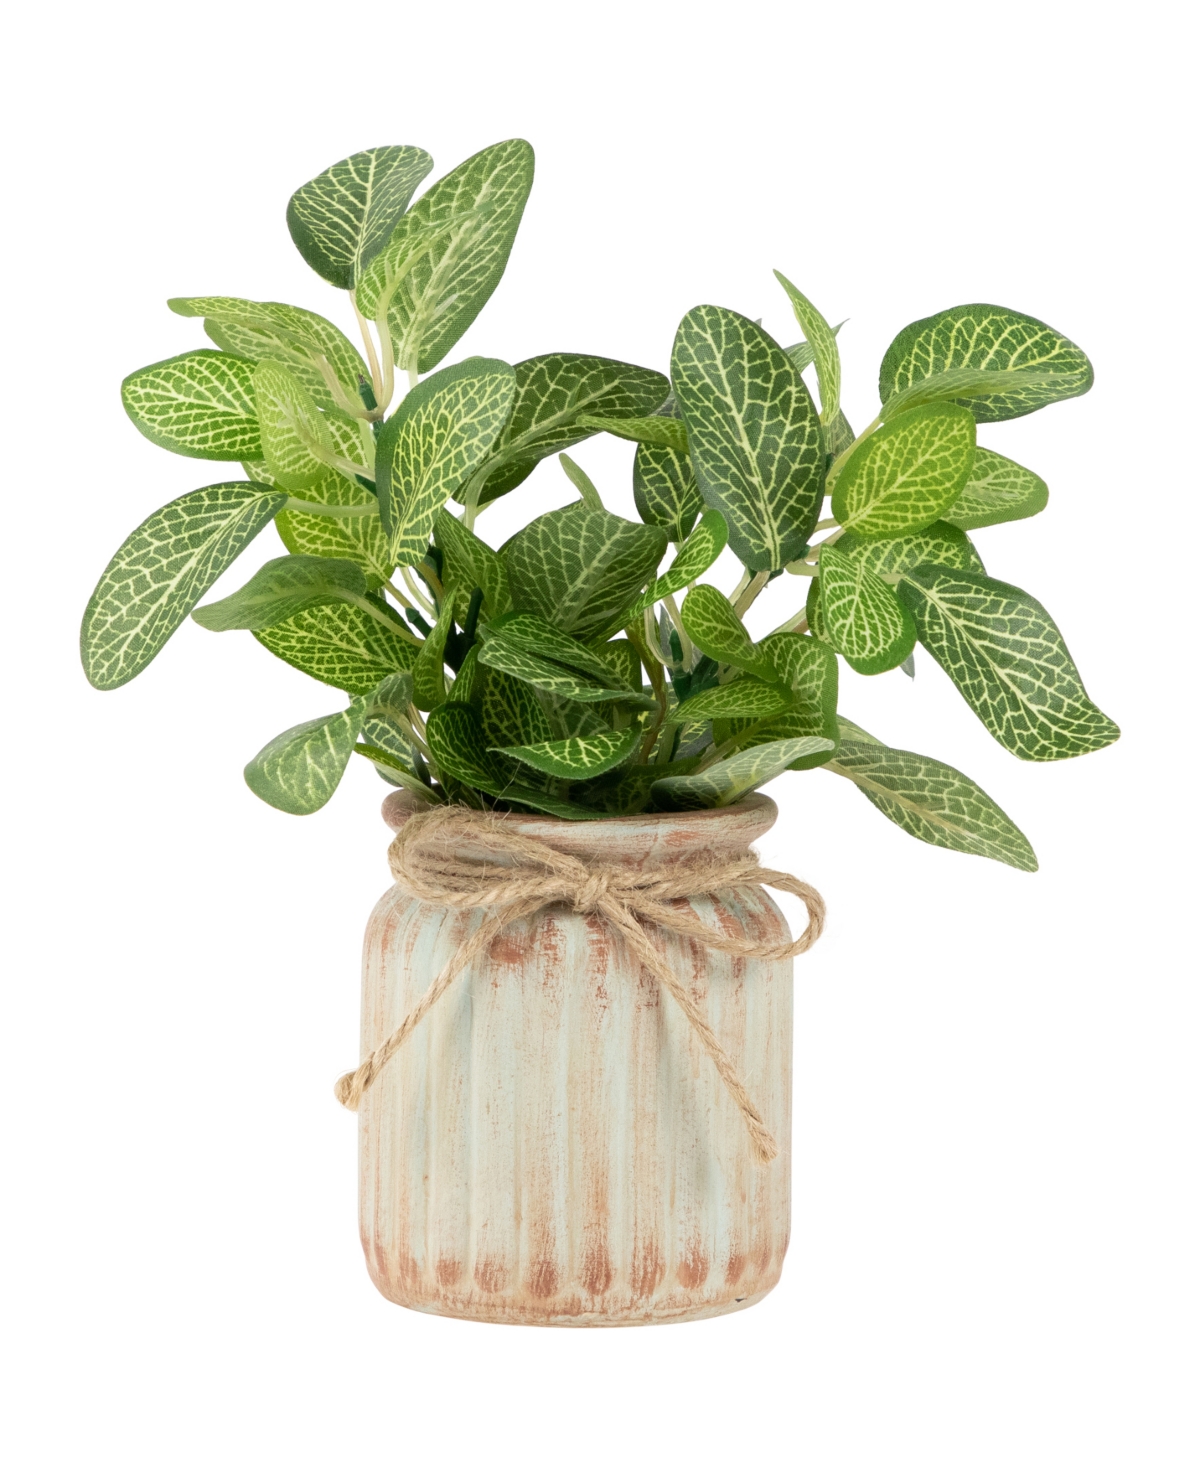 Northlight 8" Reticulated Artificial Spring Foliage In Ceramic Pot In Green